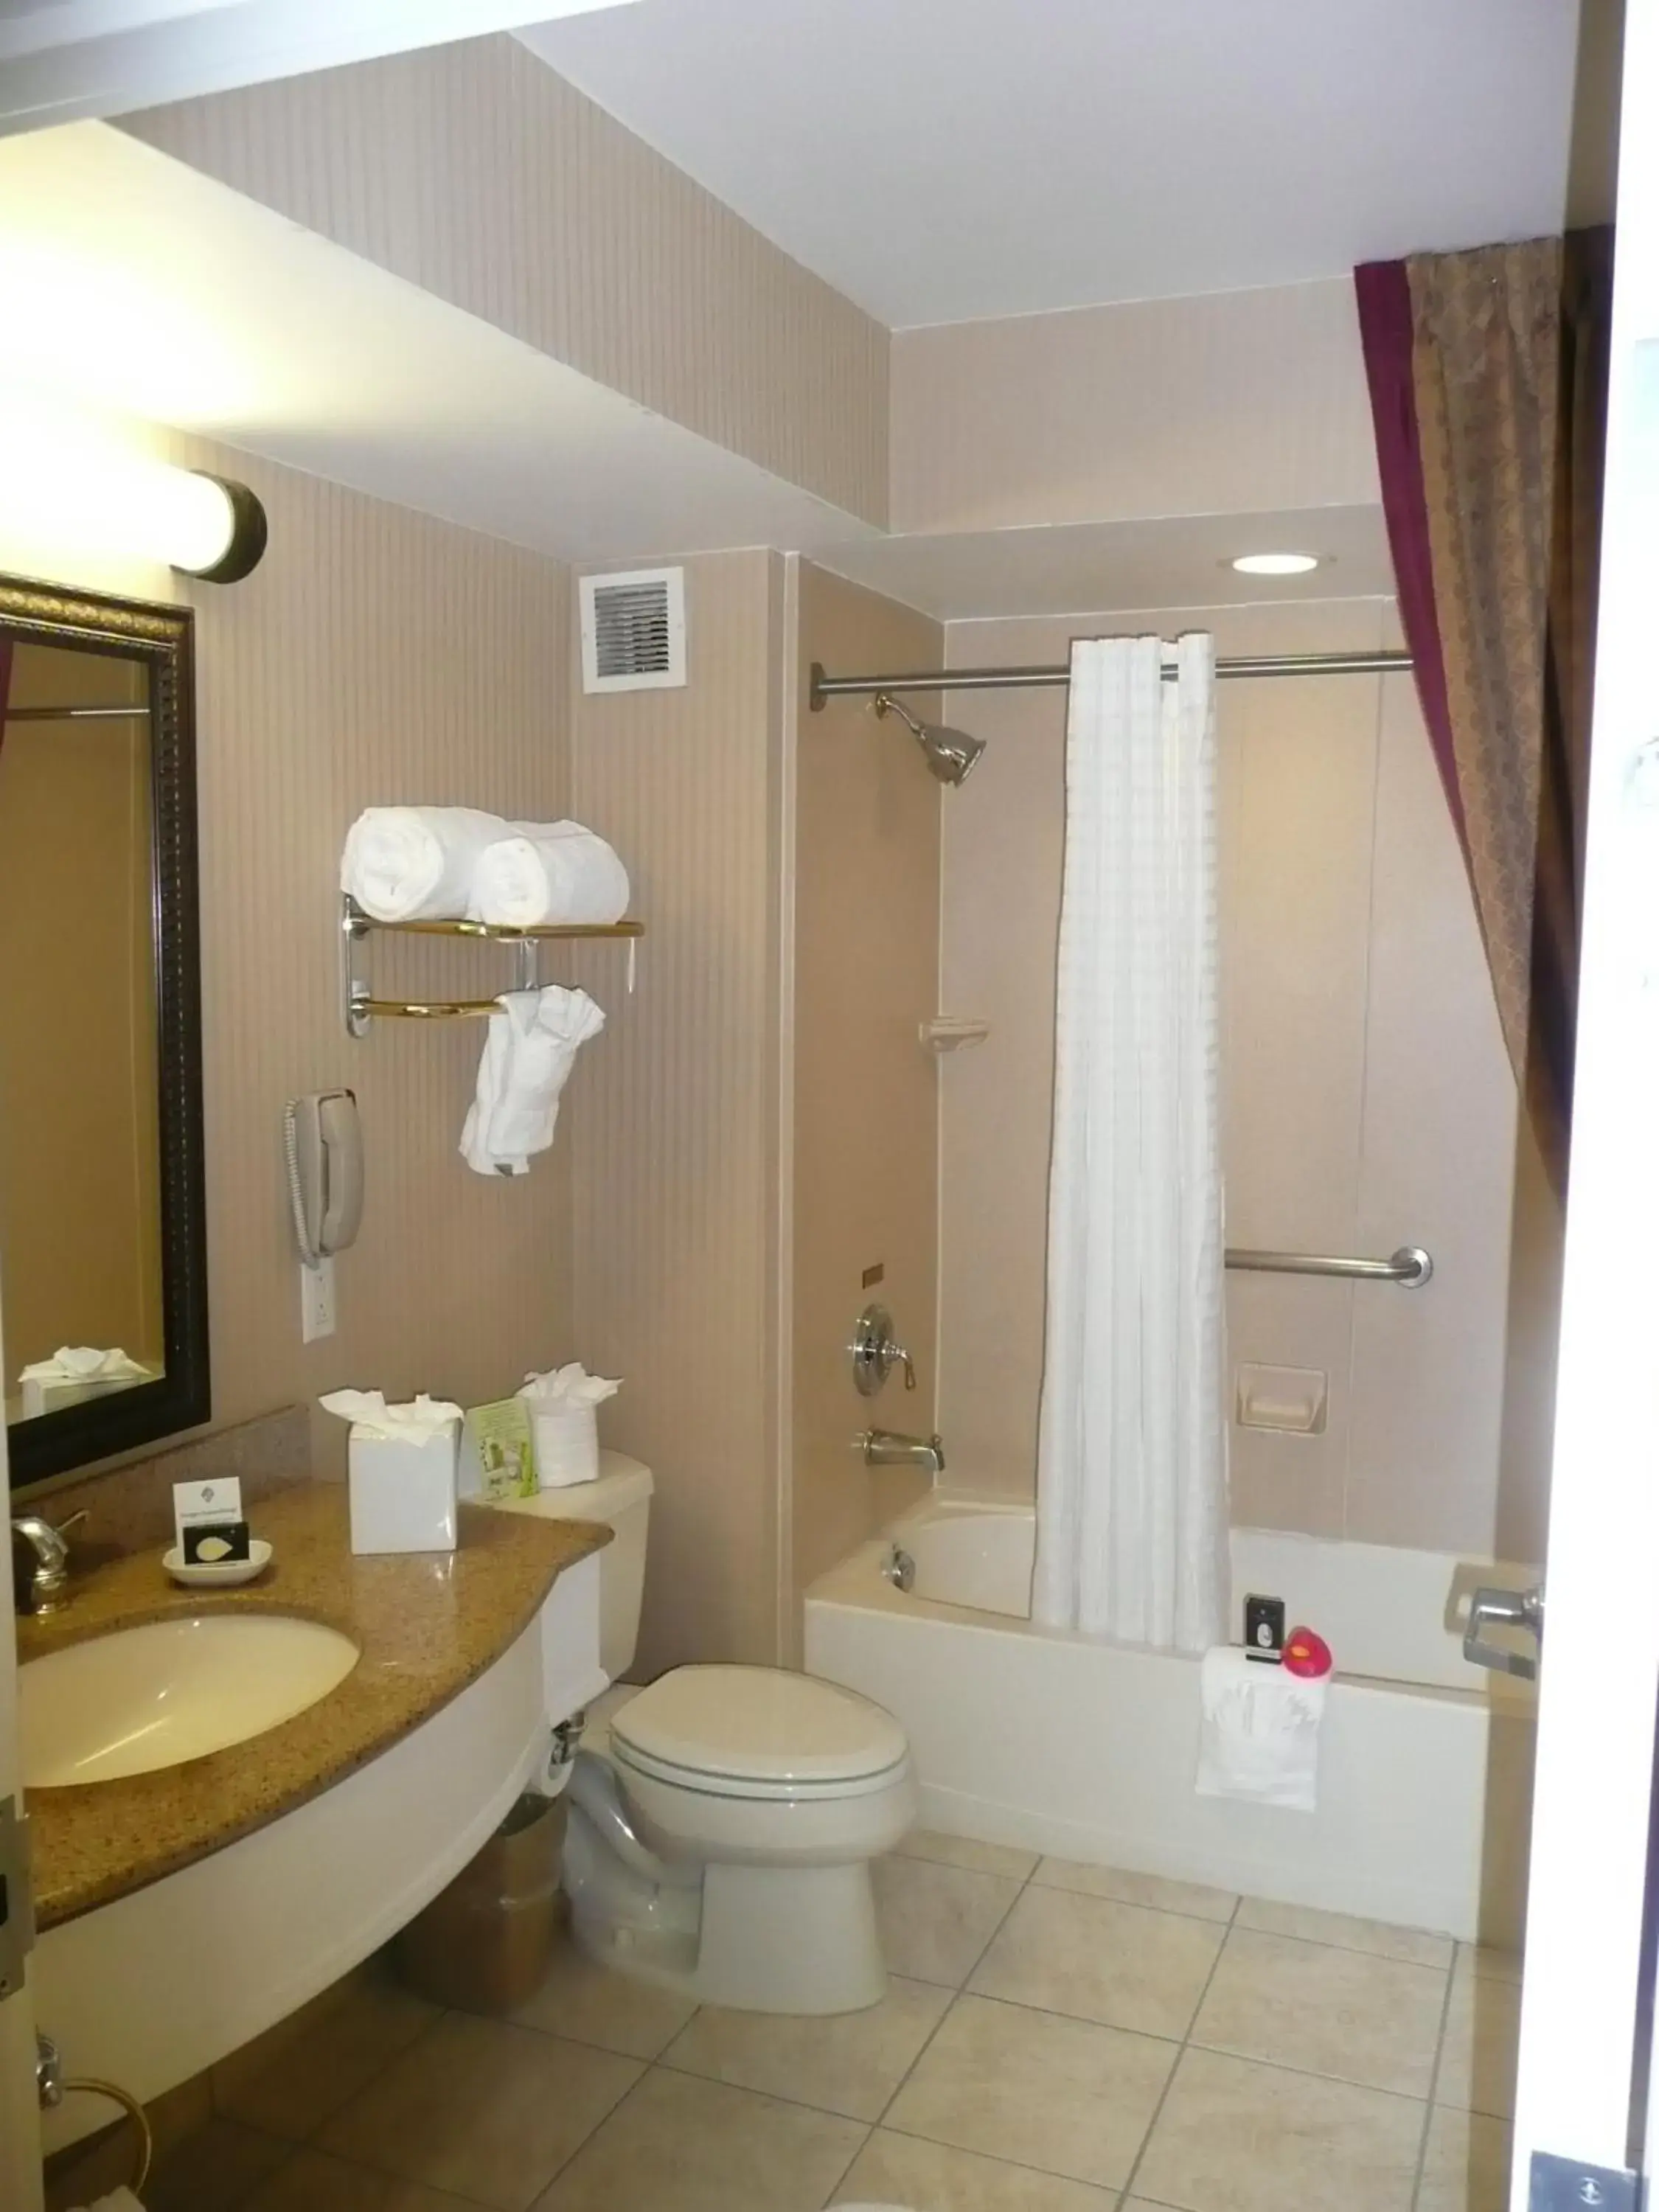 Bathroom in The Wilshire Grand Hotel